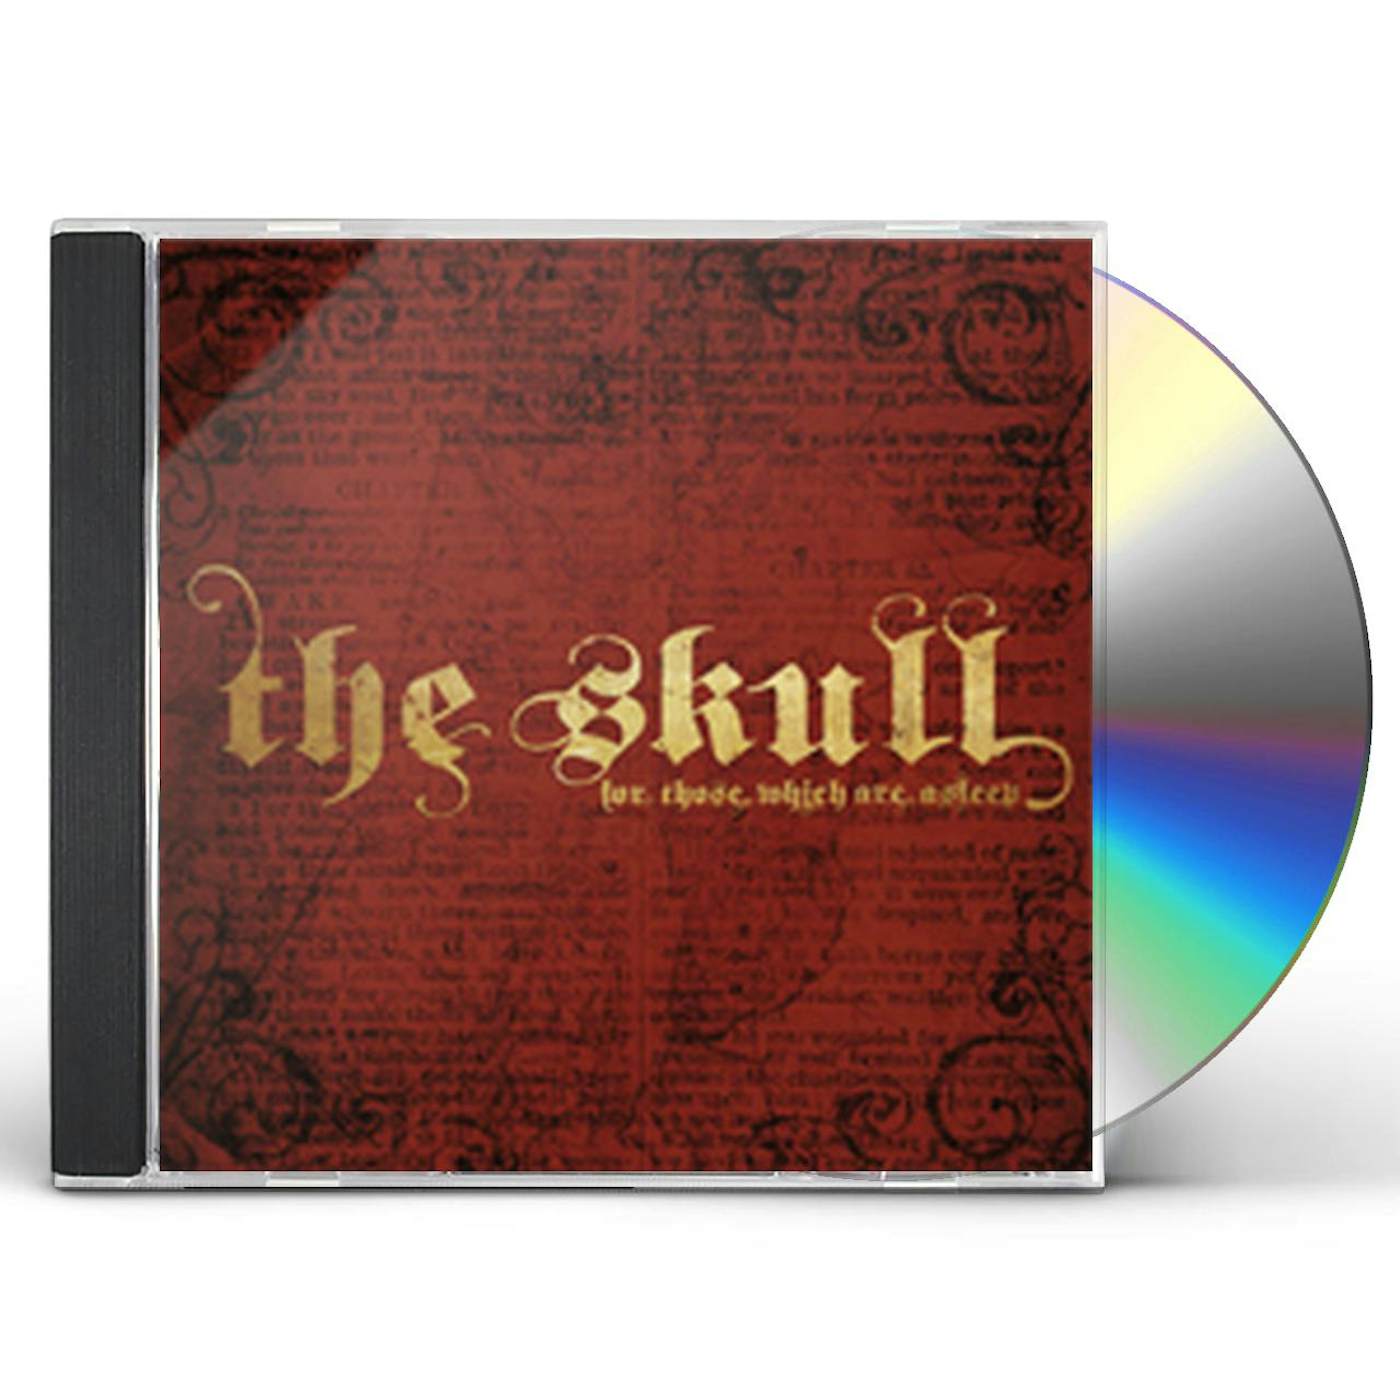 The Skull FOR THOSE WHICH ARE ASLEEP CD